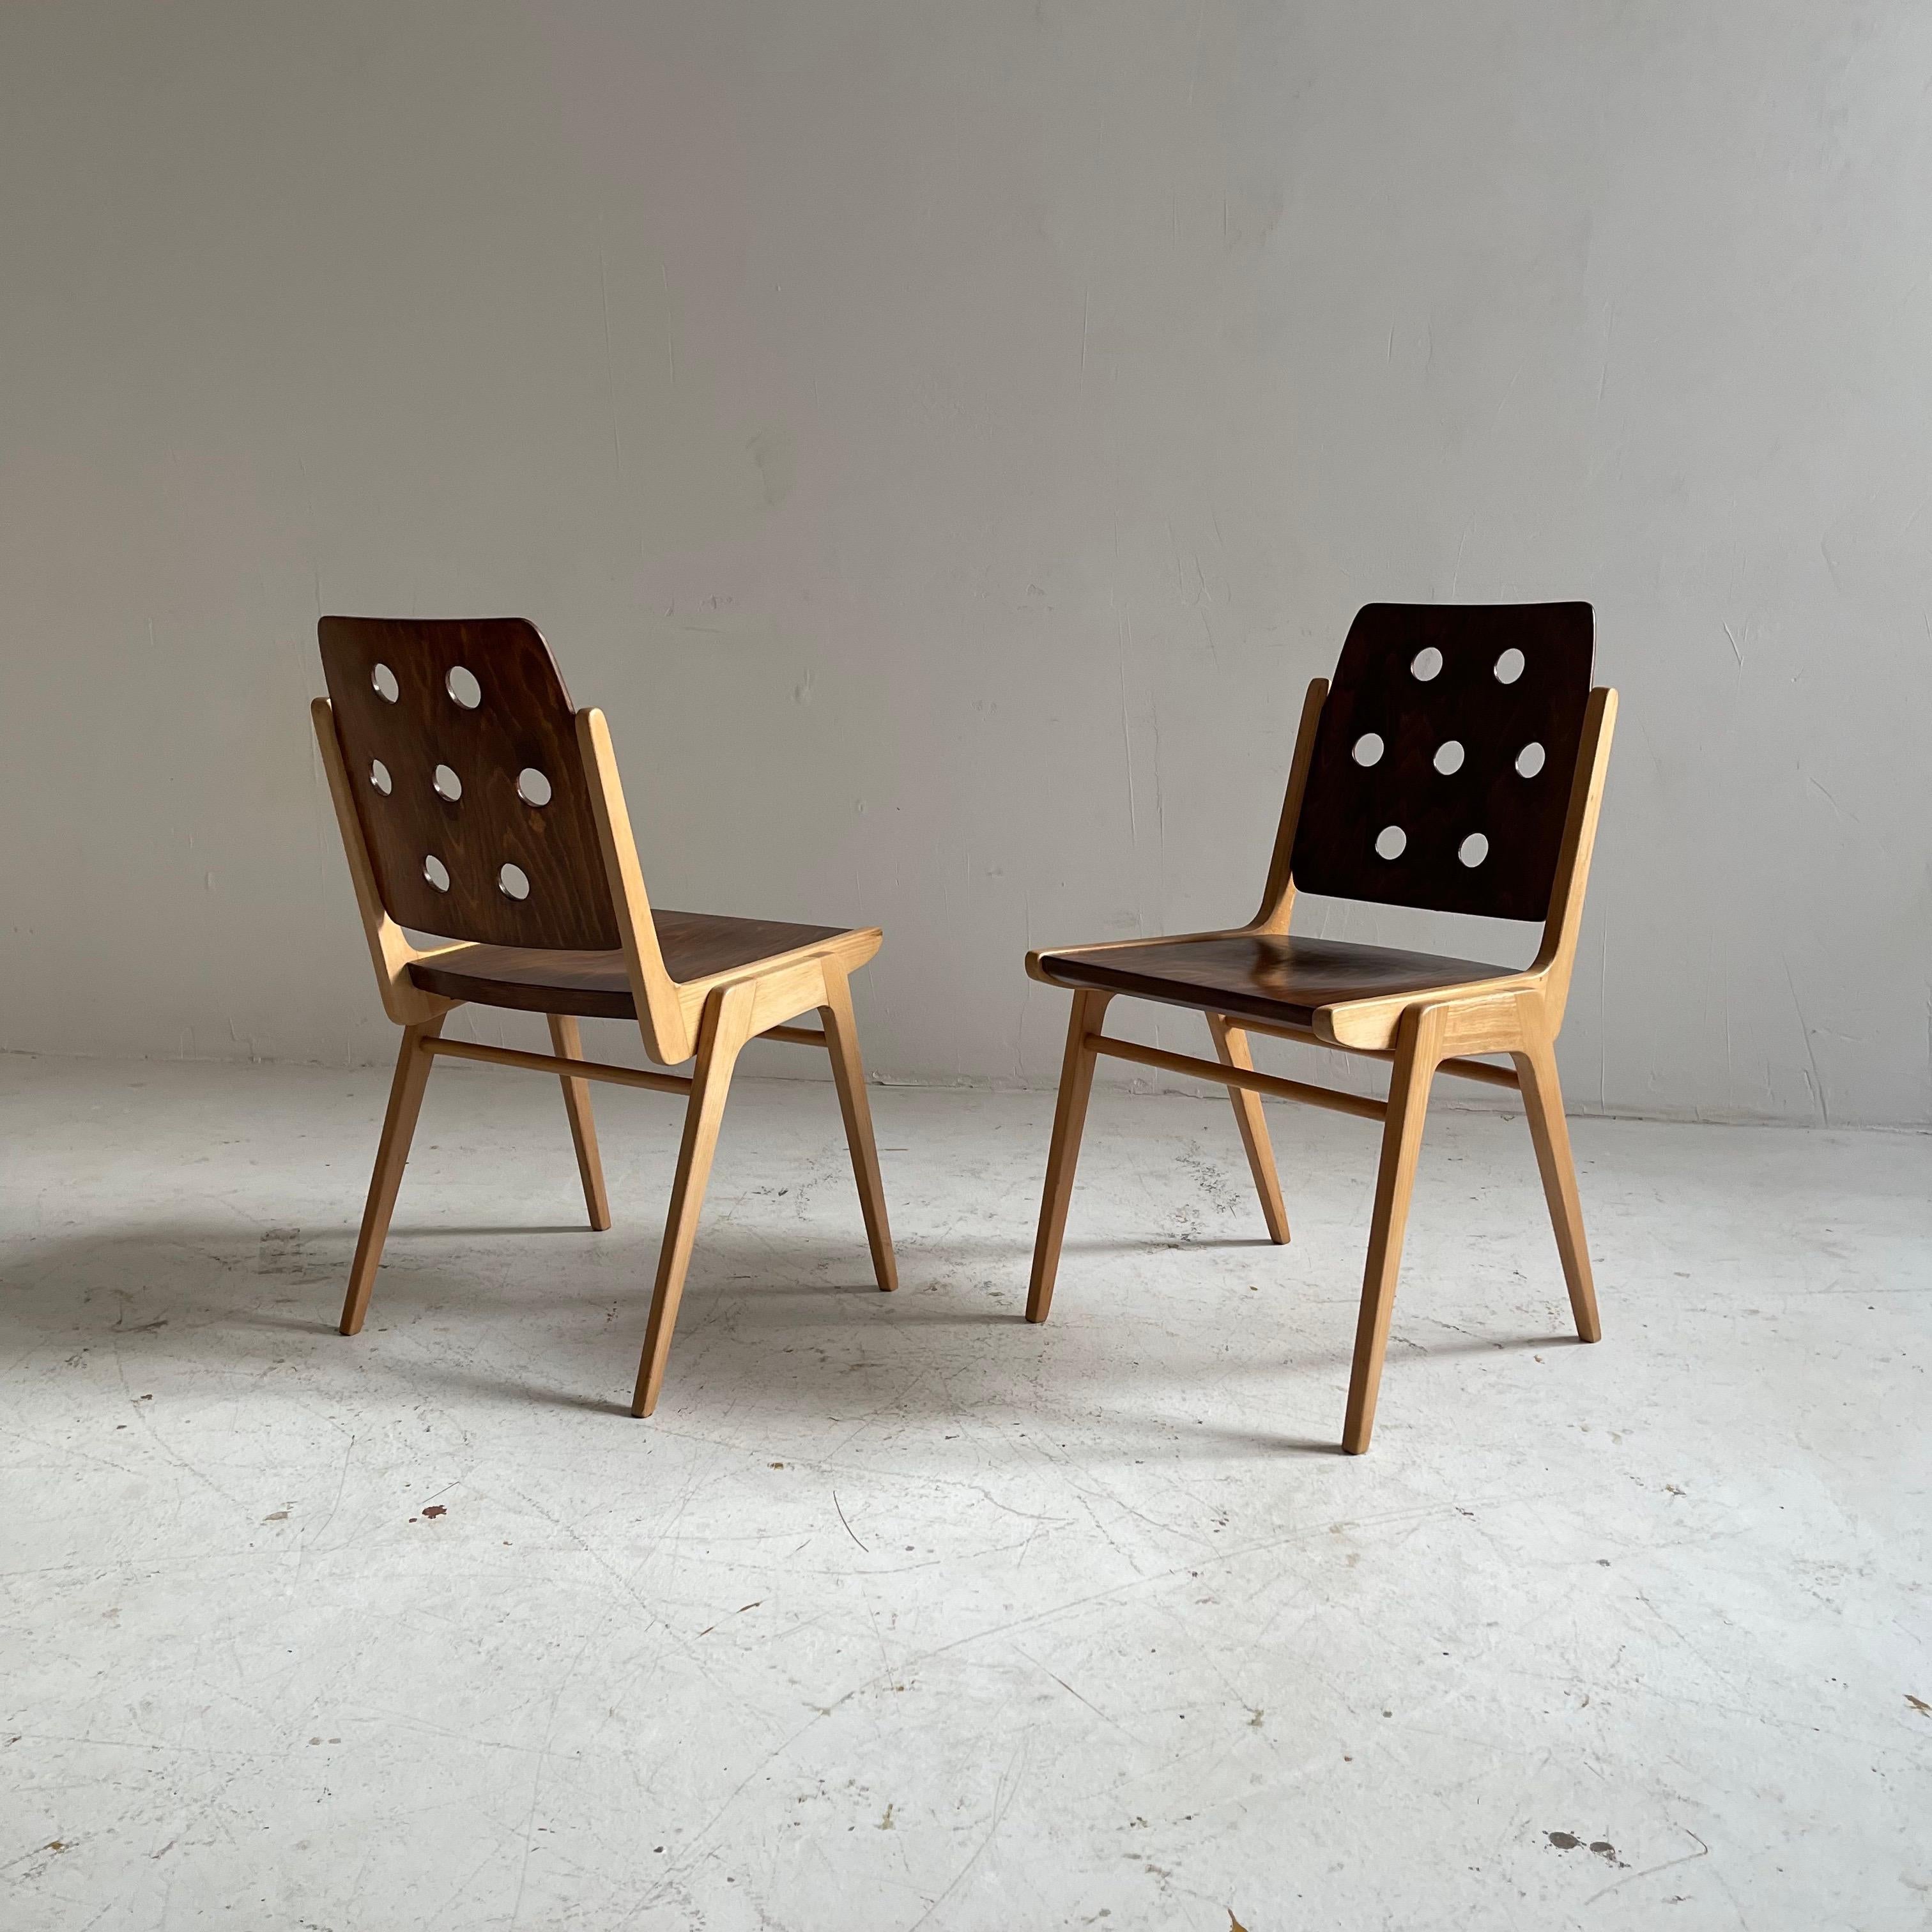 Franz Schuster Stacking Chair Set of Two, Austria 1955 For Sale 1